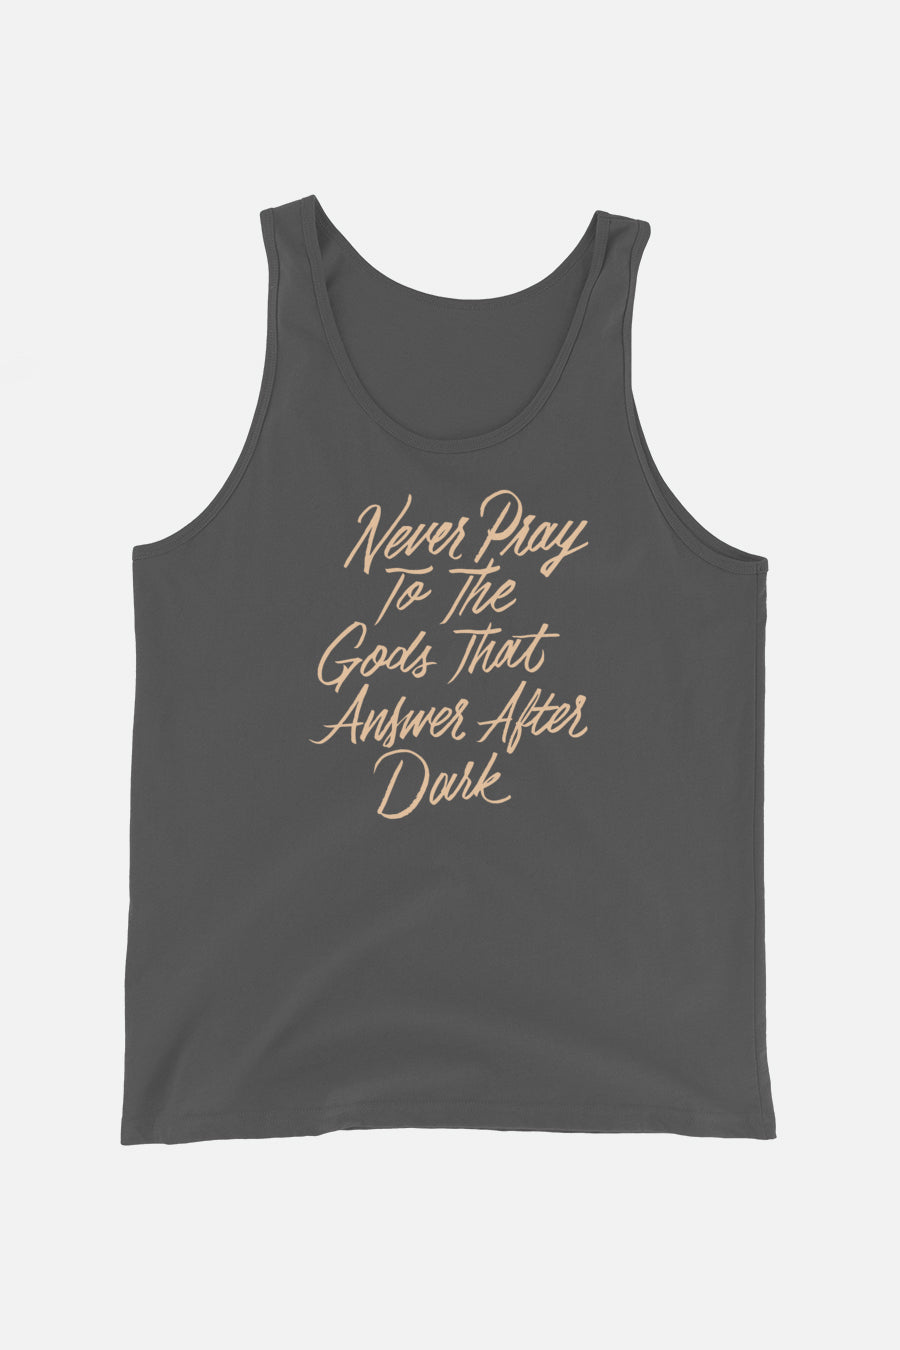 Never Pray to the Gods that Answer After Dark Unisex Tank Top | The Invisible Life of Addie LaRue